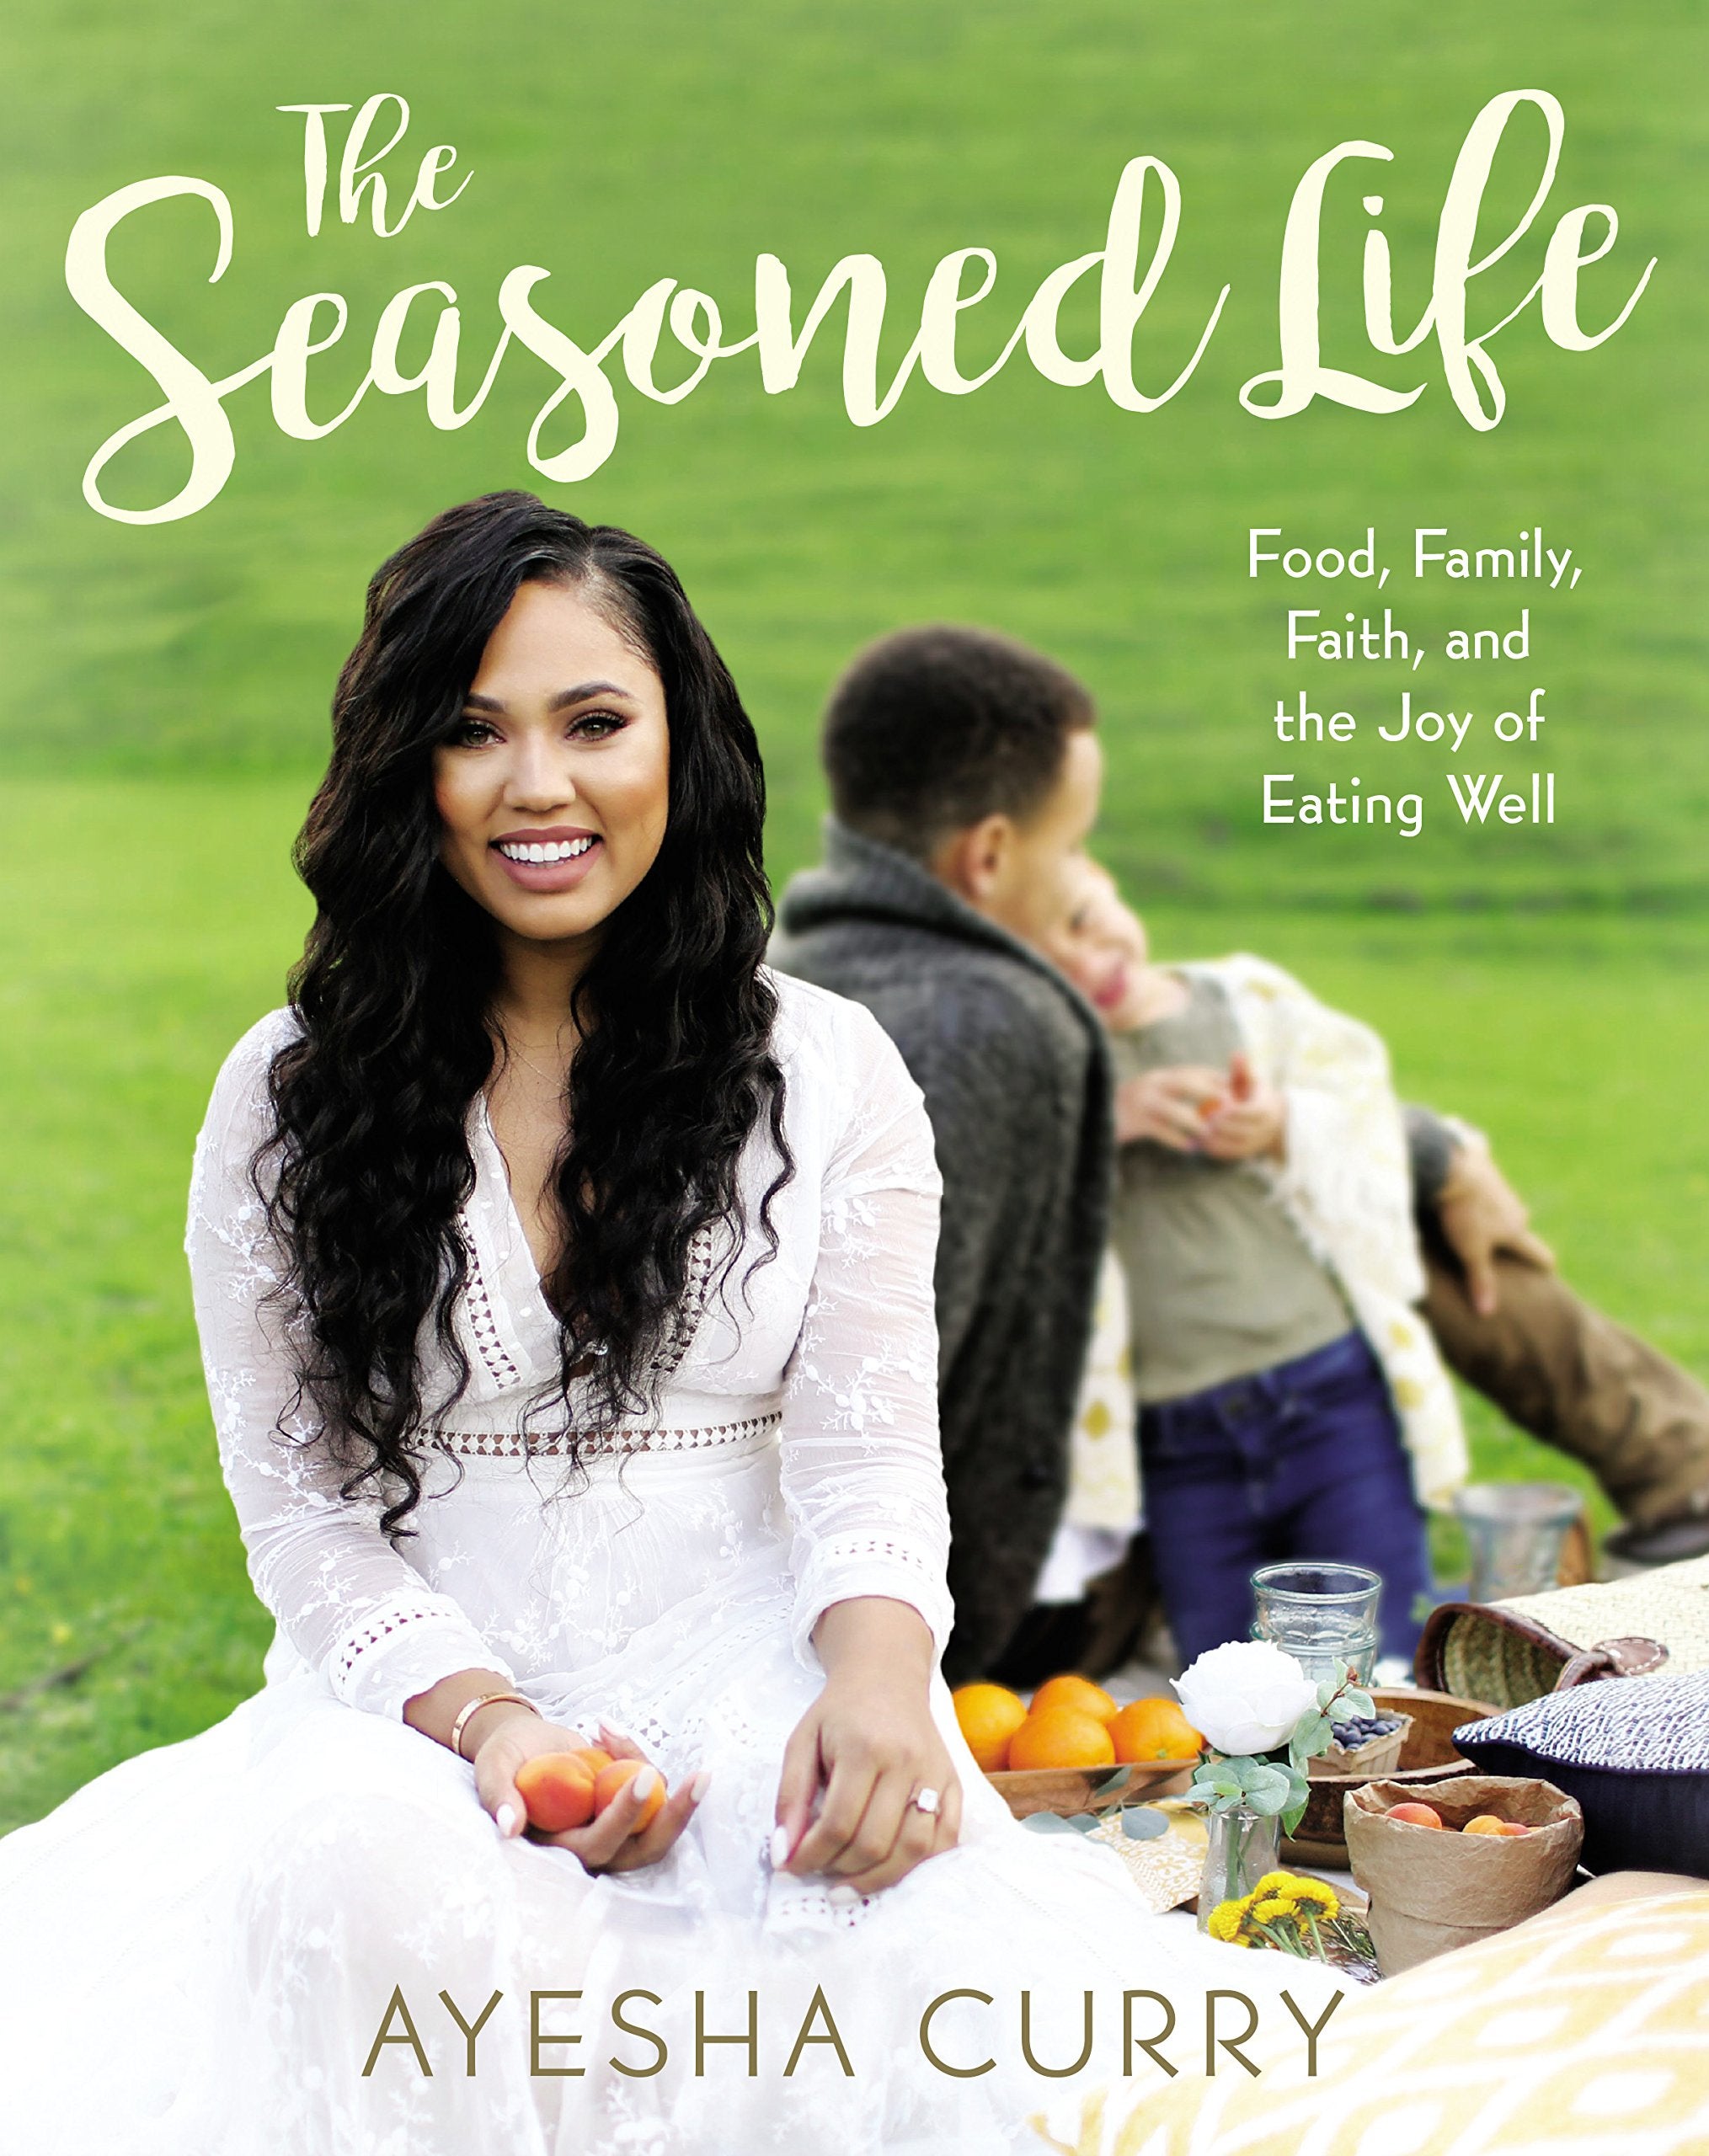 Our Favorite Christmas Gift Finds From Ayesha Curry's Lifestyle Empire
